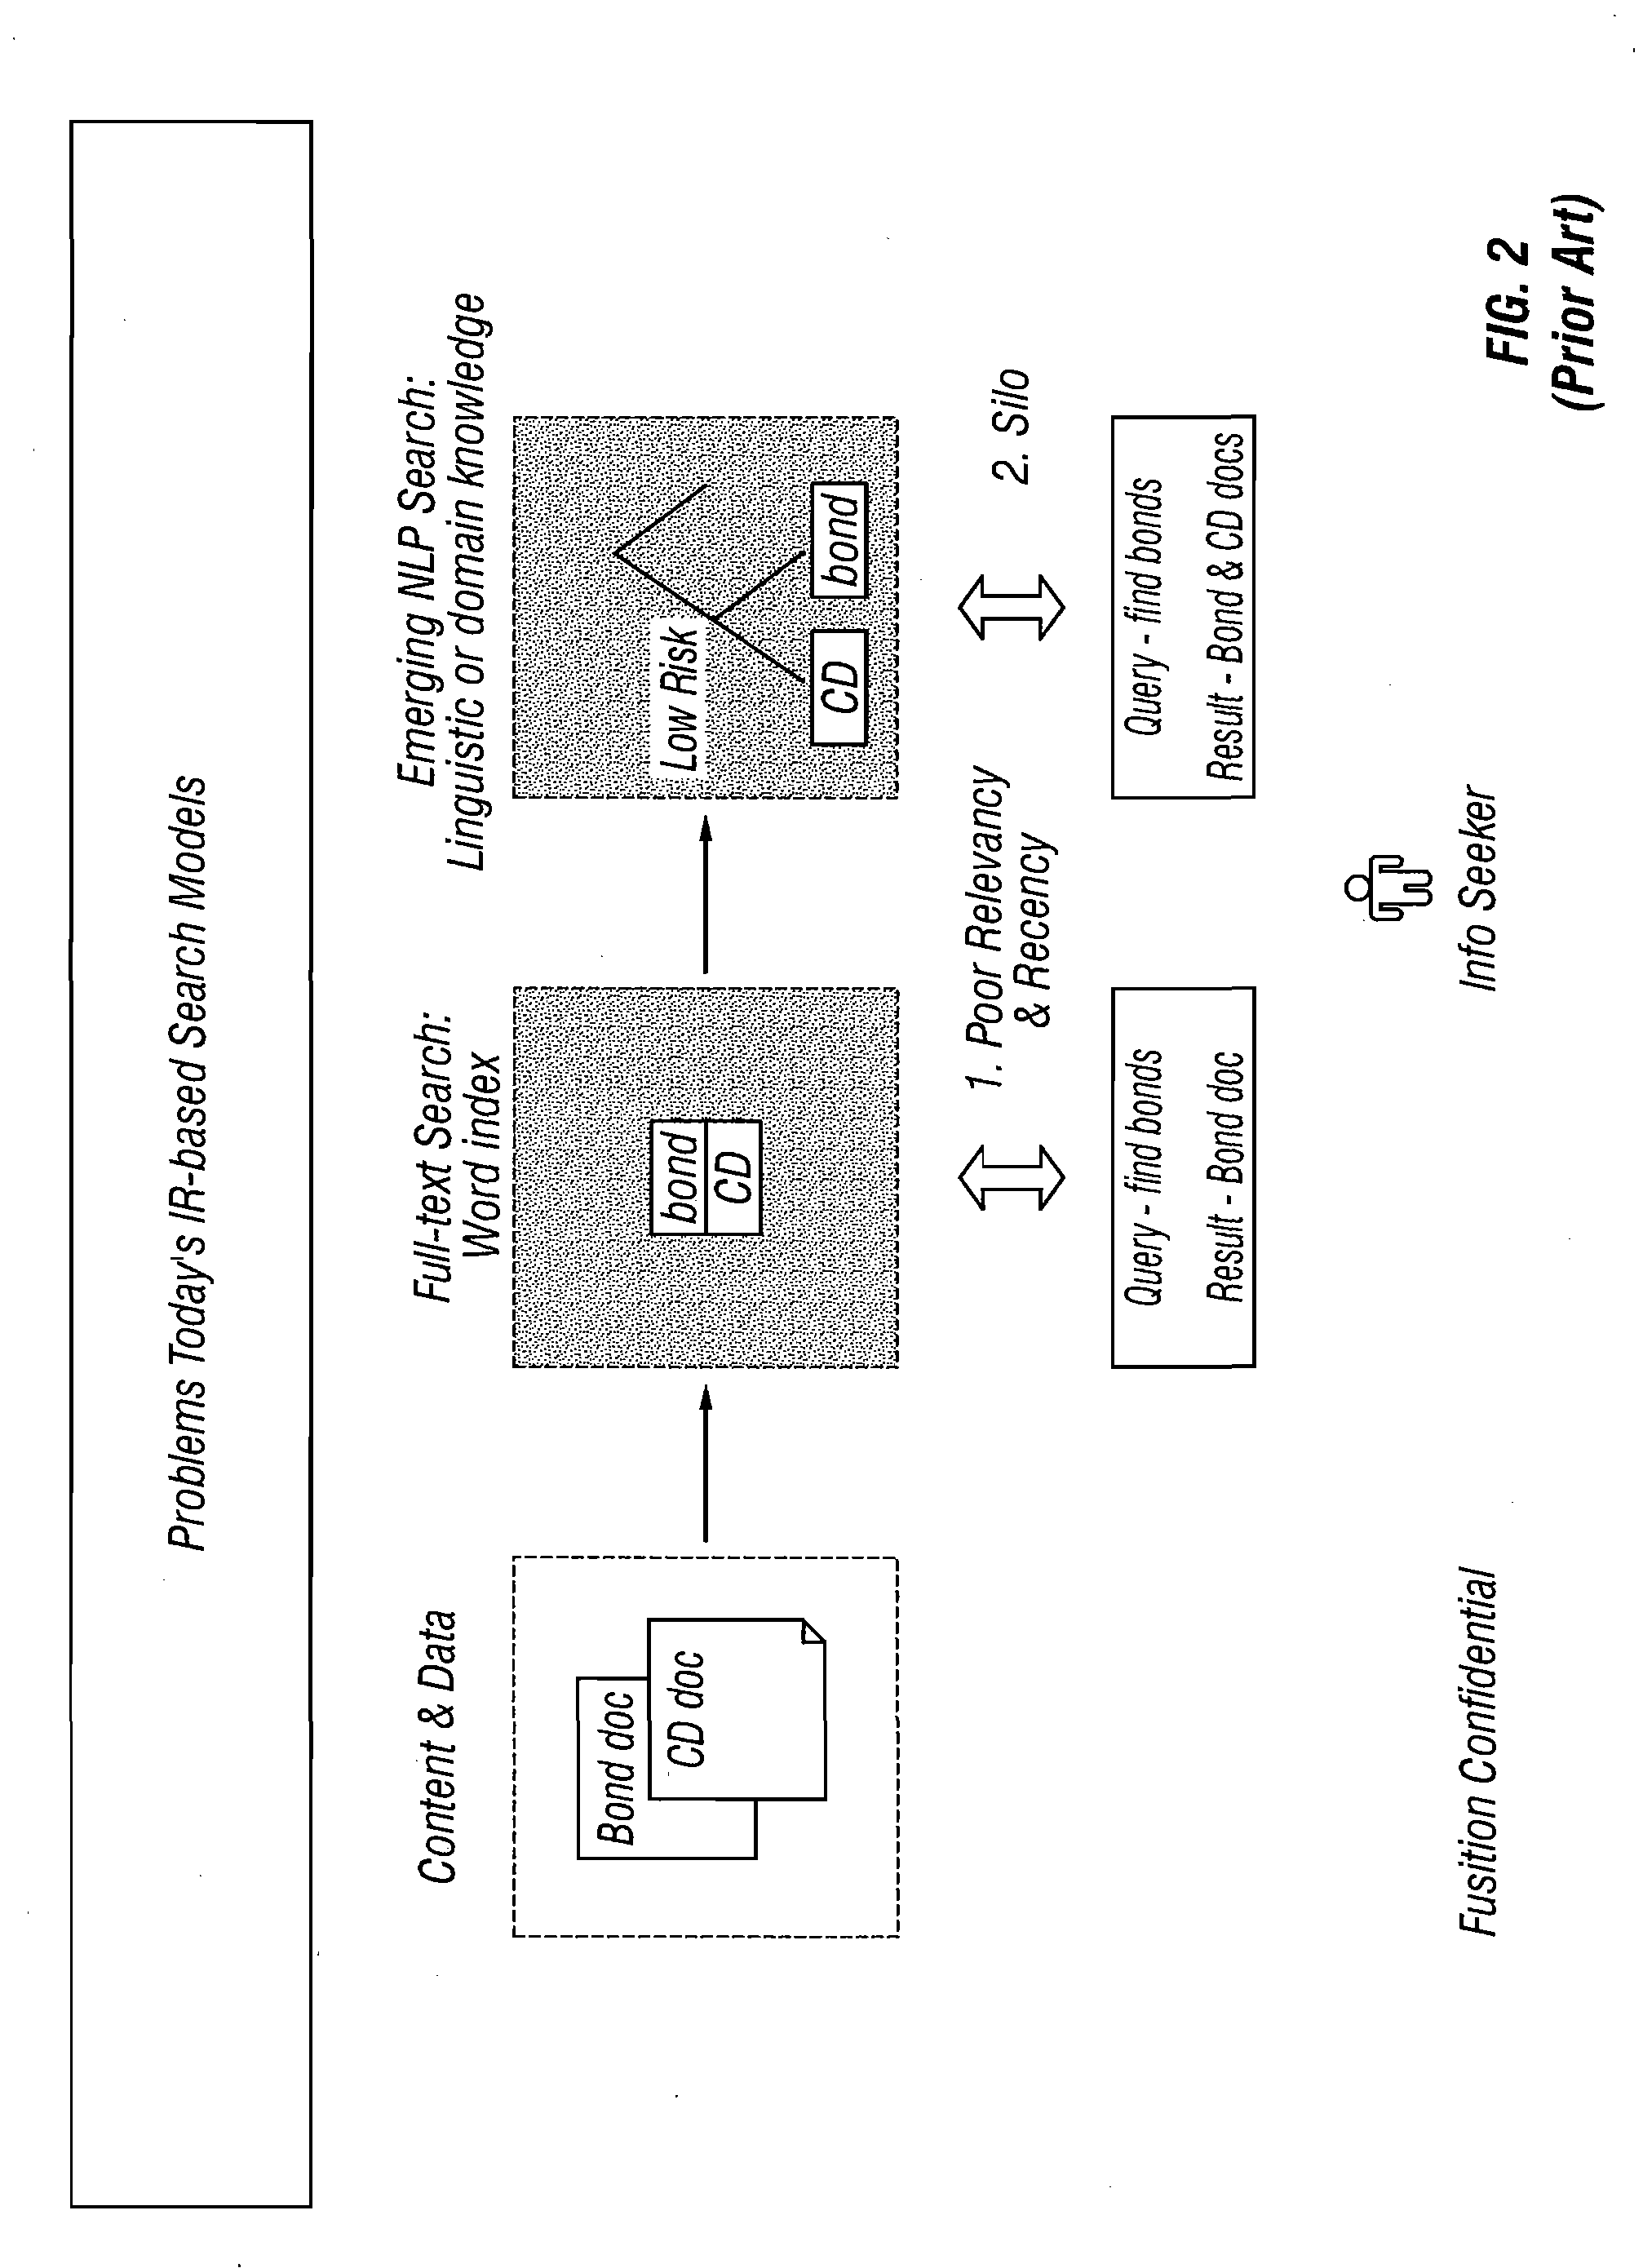 Method and apparatus for identifying, extracting, capturing, and leveraging expertise and knowledge